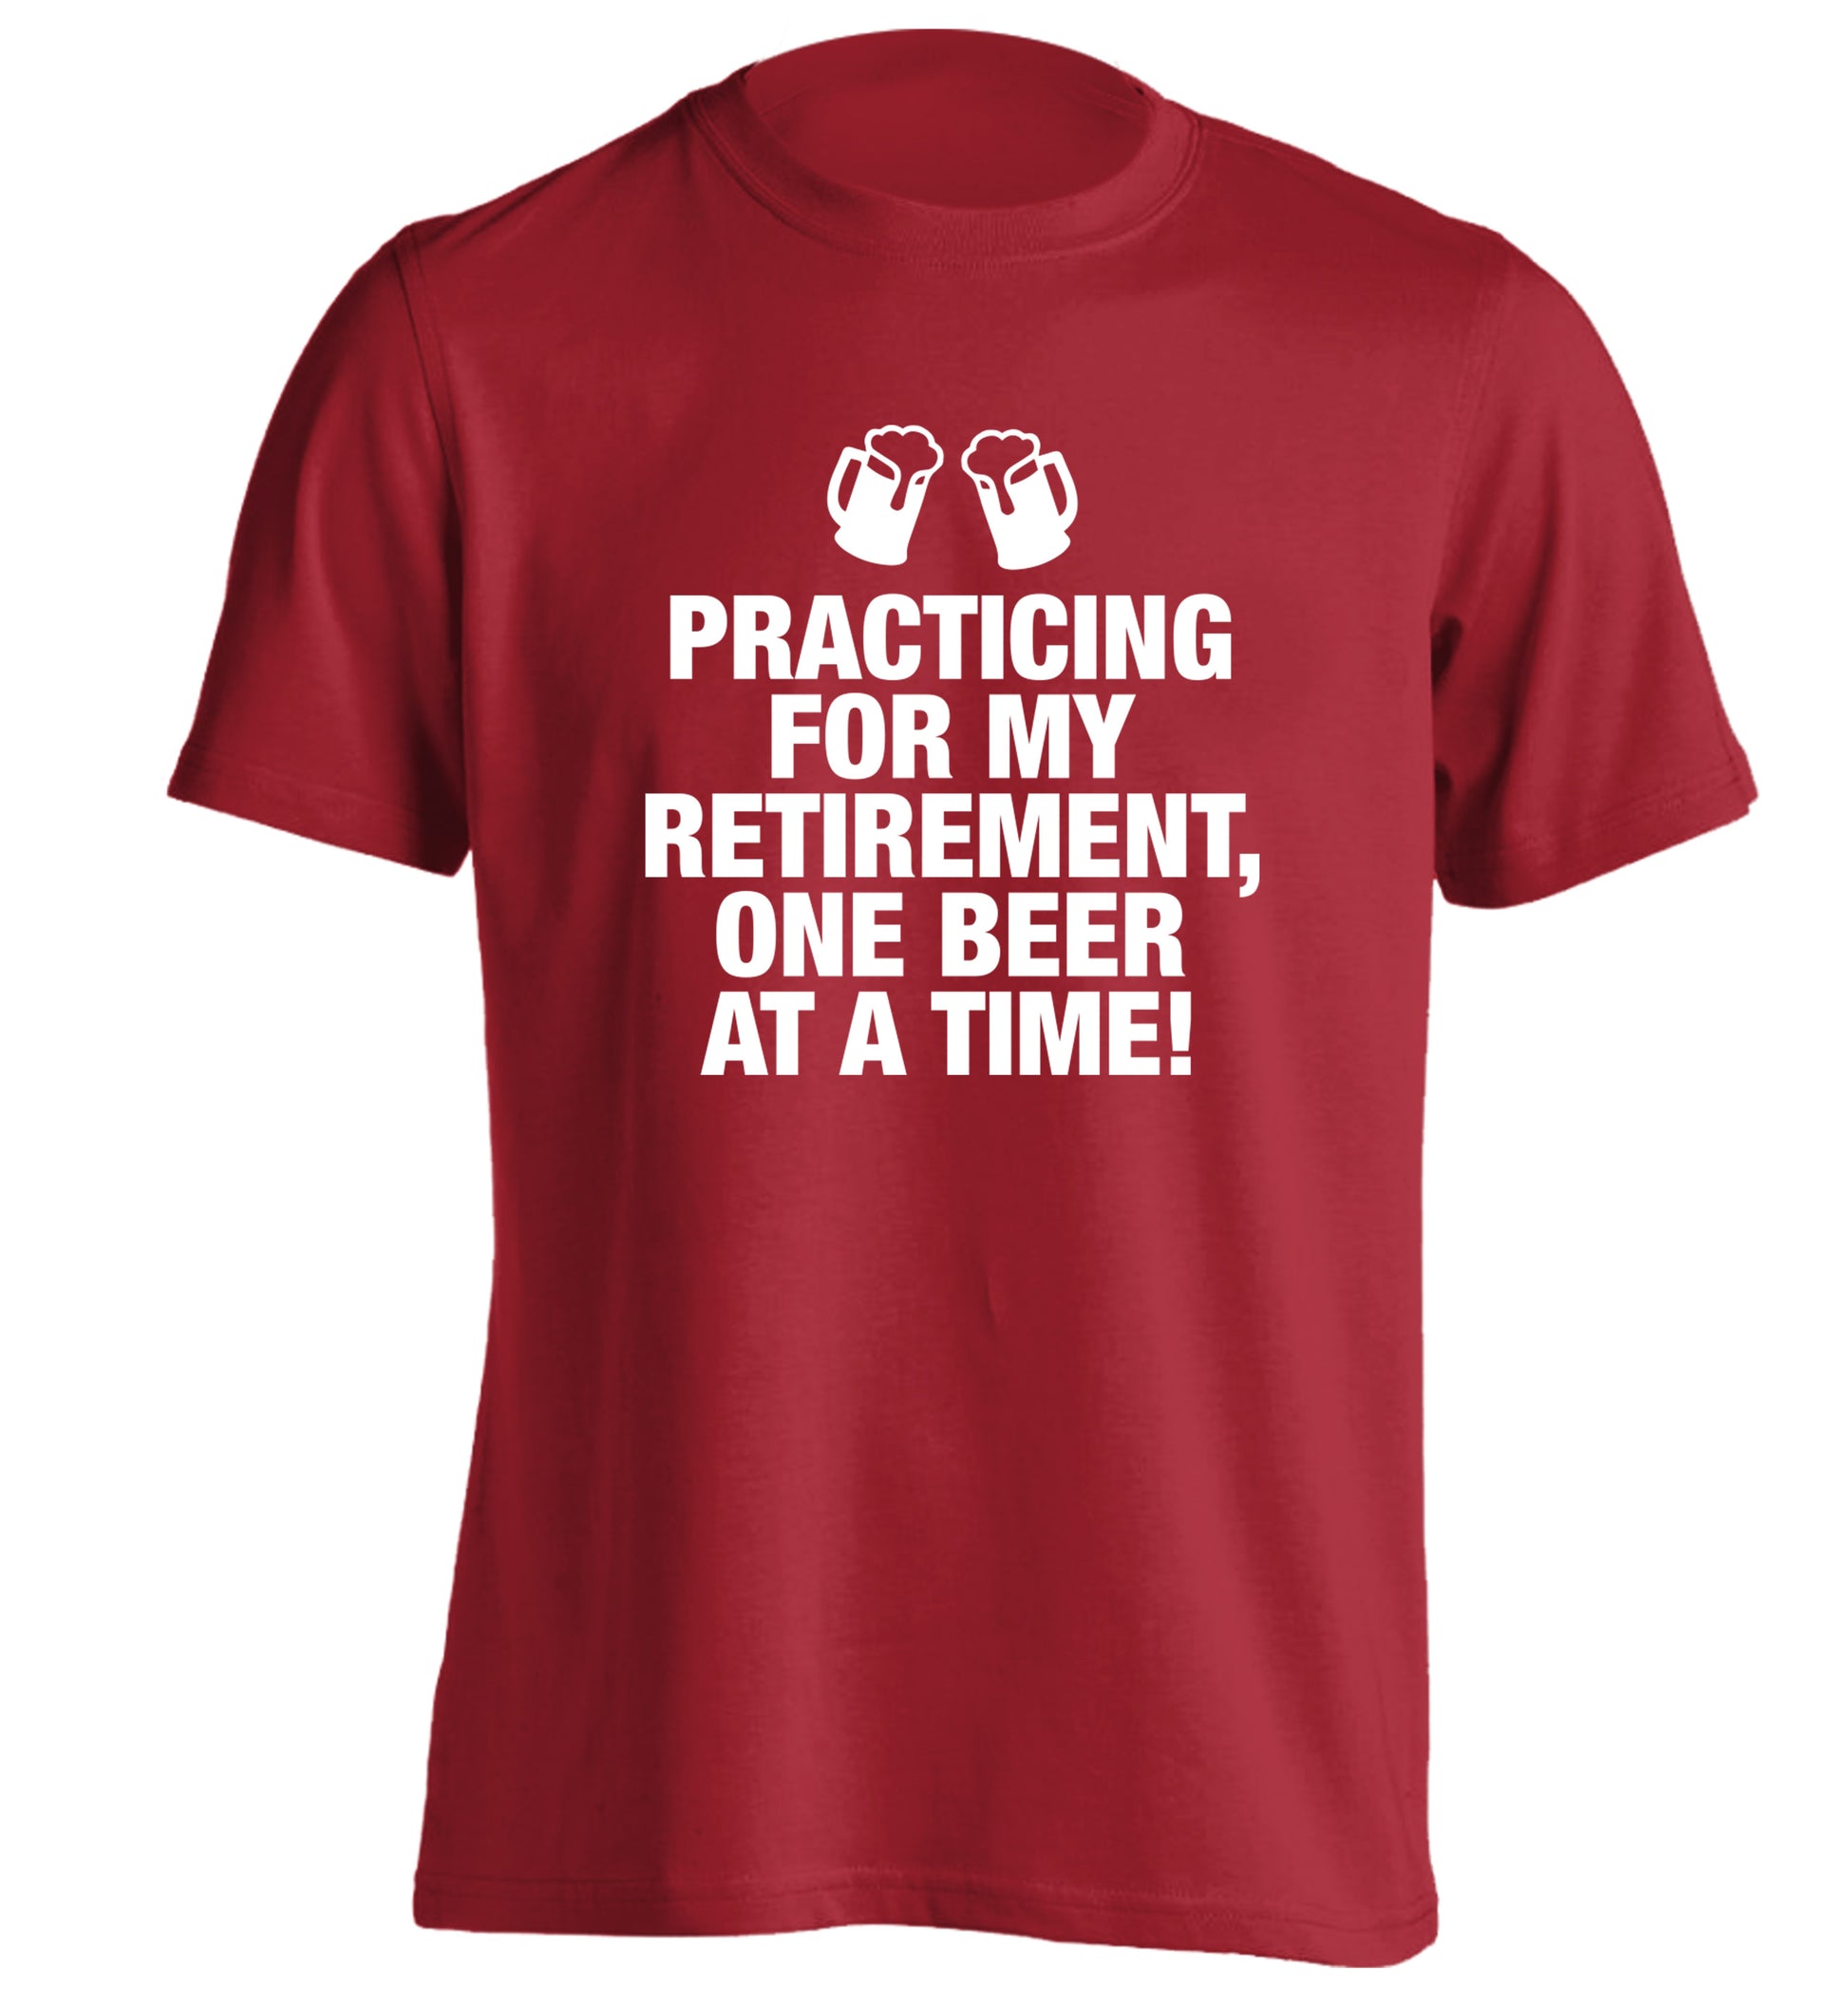 Practicing my retirement one beer at a time adults unisex red Tshirt 2XL